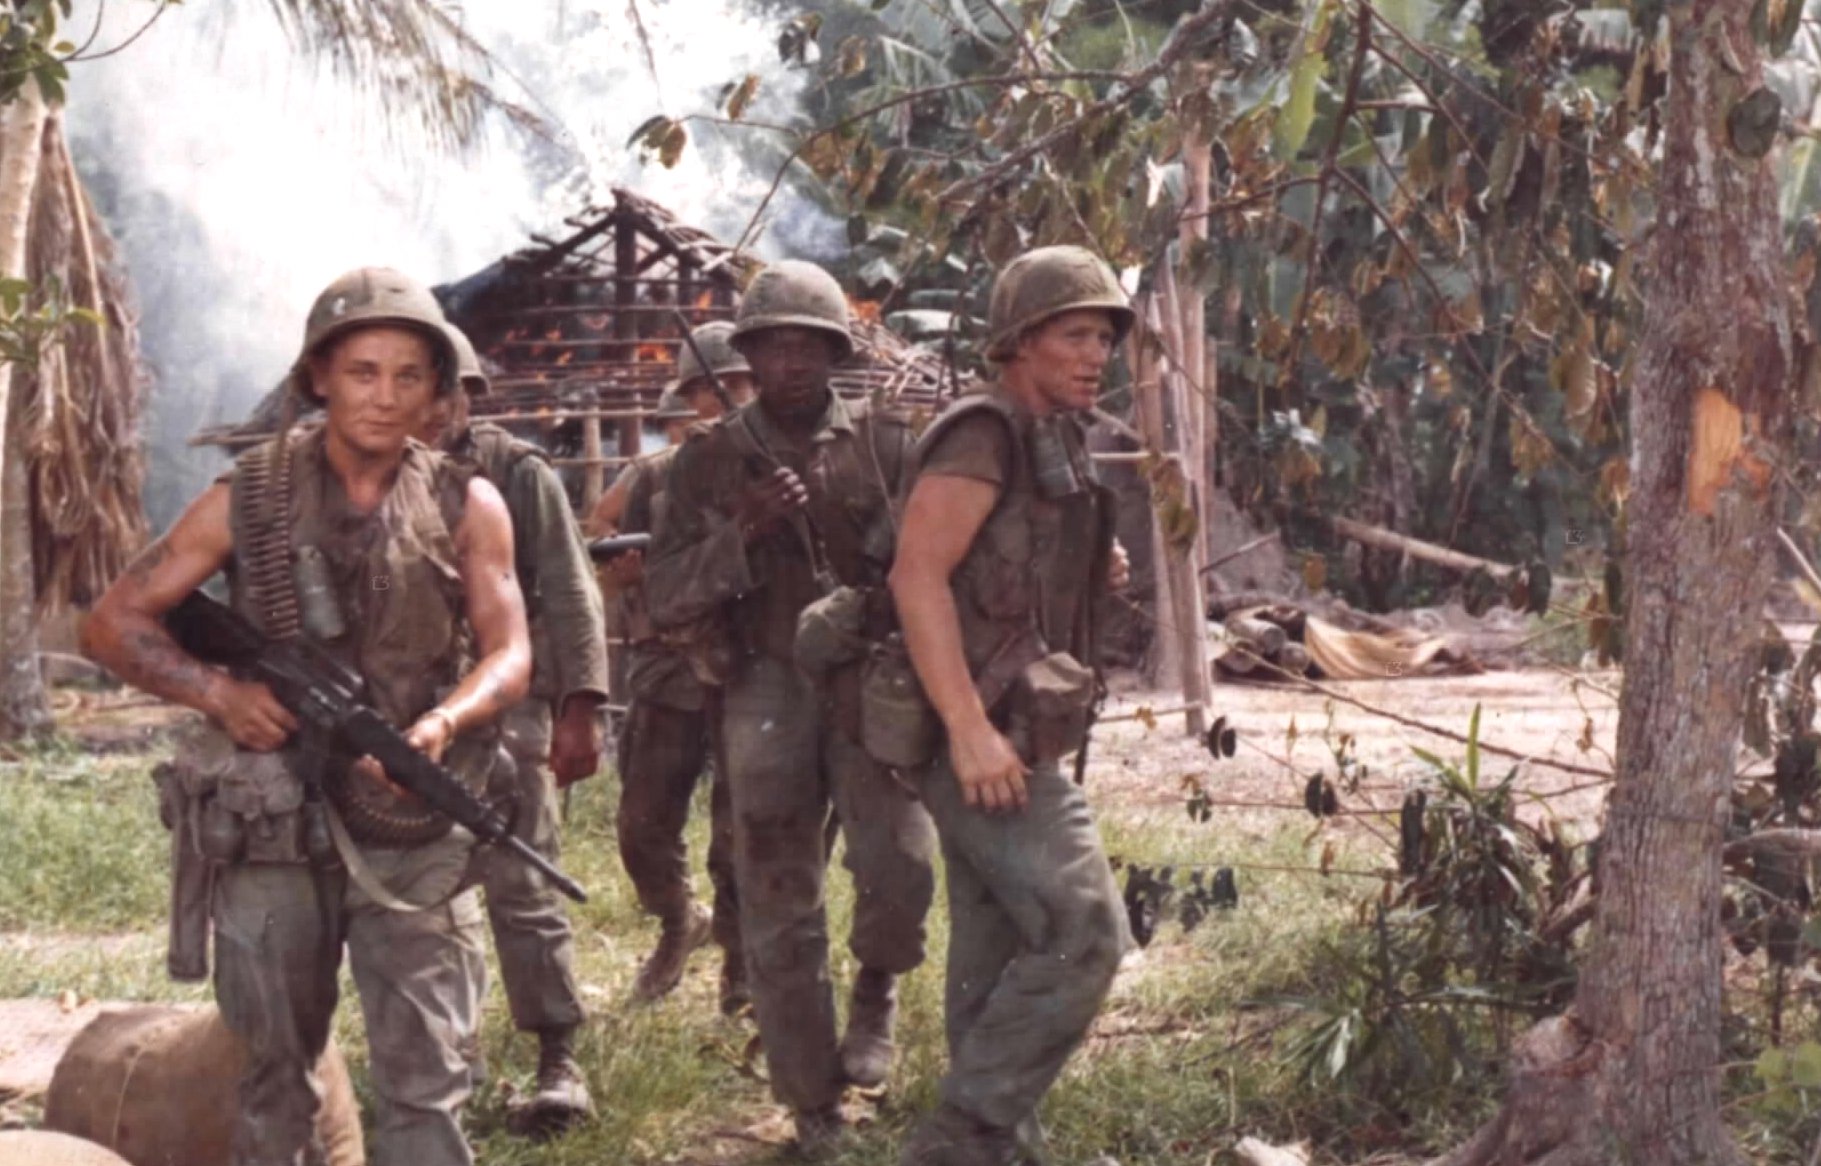 Members of the United States' 14th Infantry conduct a search and destroy mission during the Vietnam War